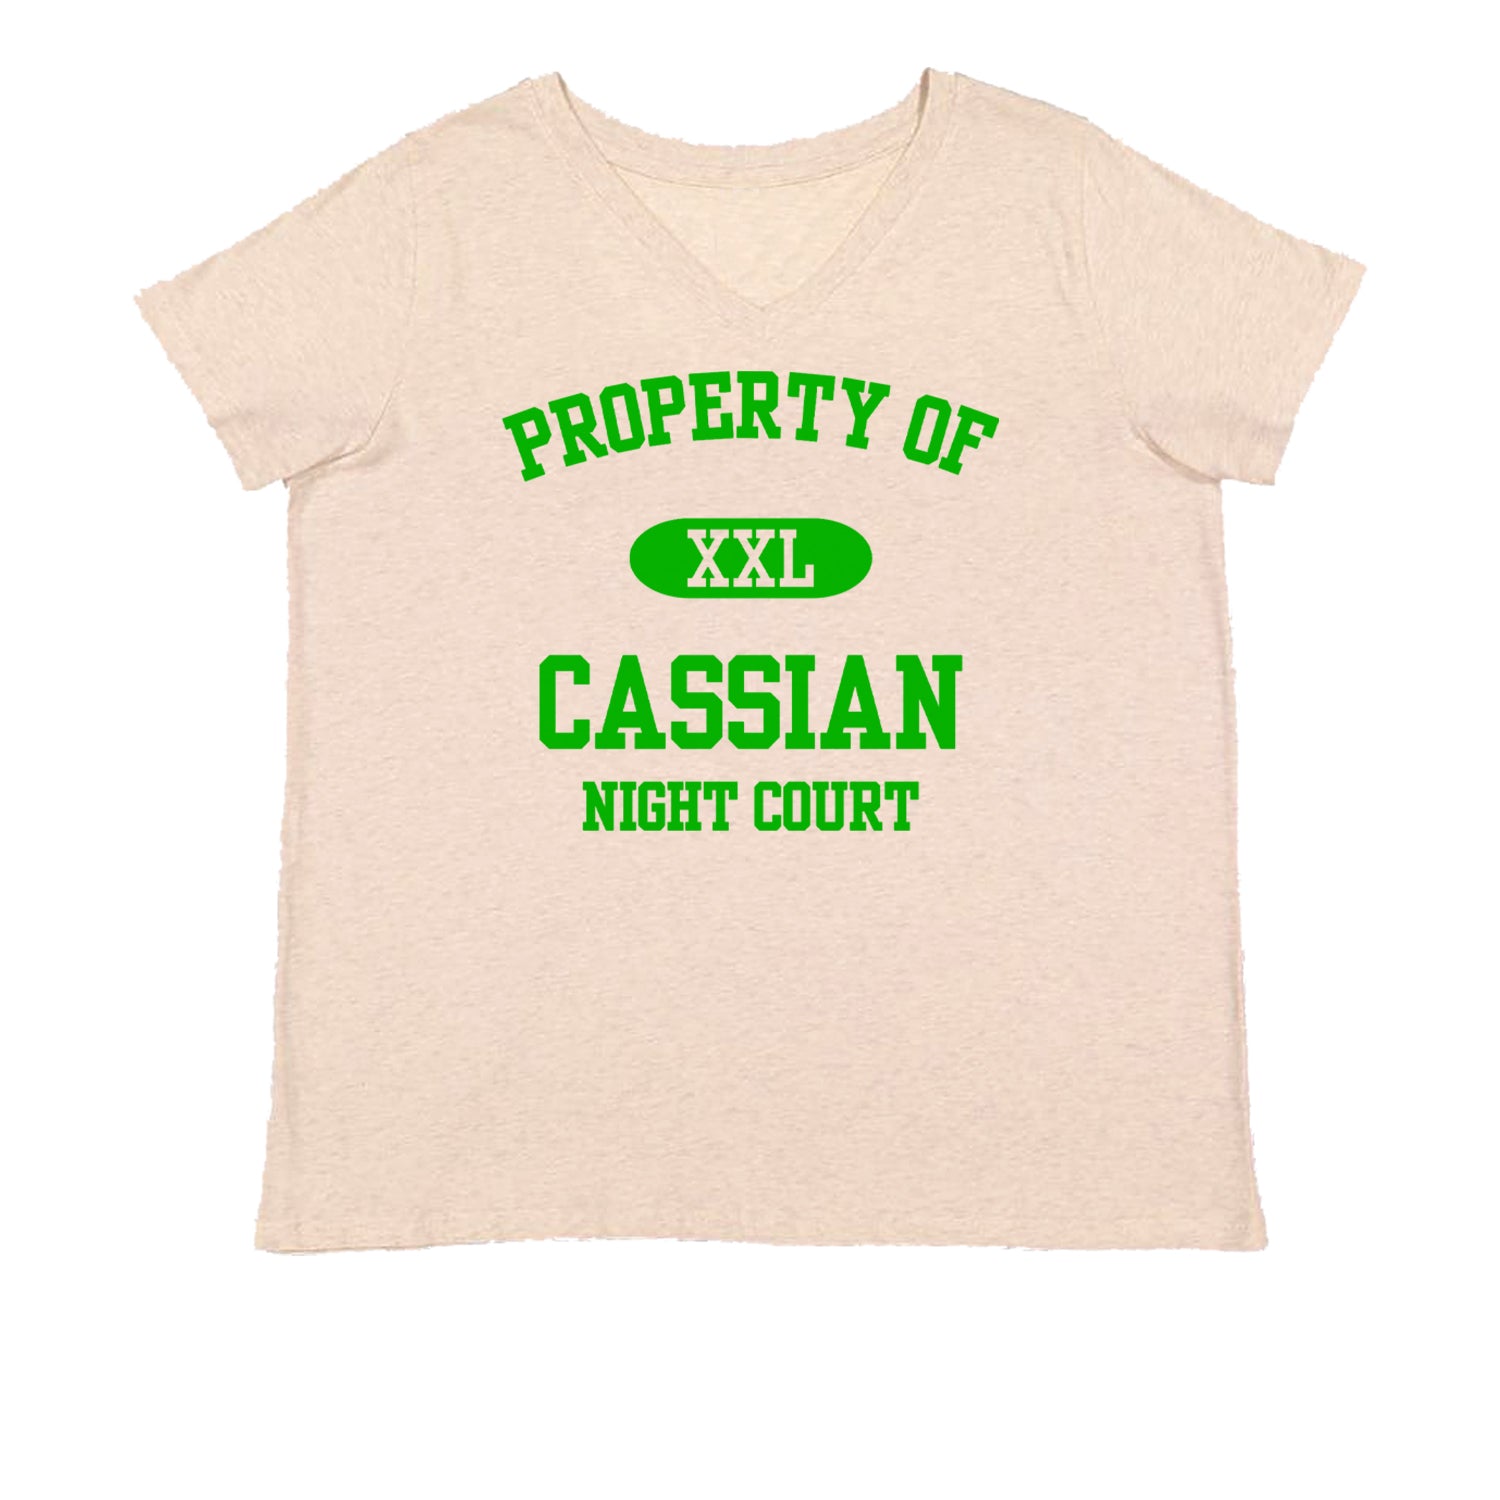 Property Of Cassian ACOTAR Womens Plus Size V-Neck T-shirt acotar, court, maas, tamlin, thorns by Expression Tees